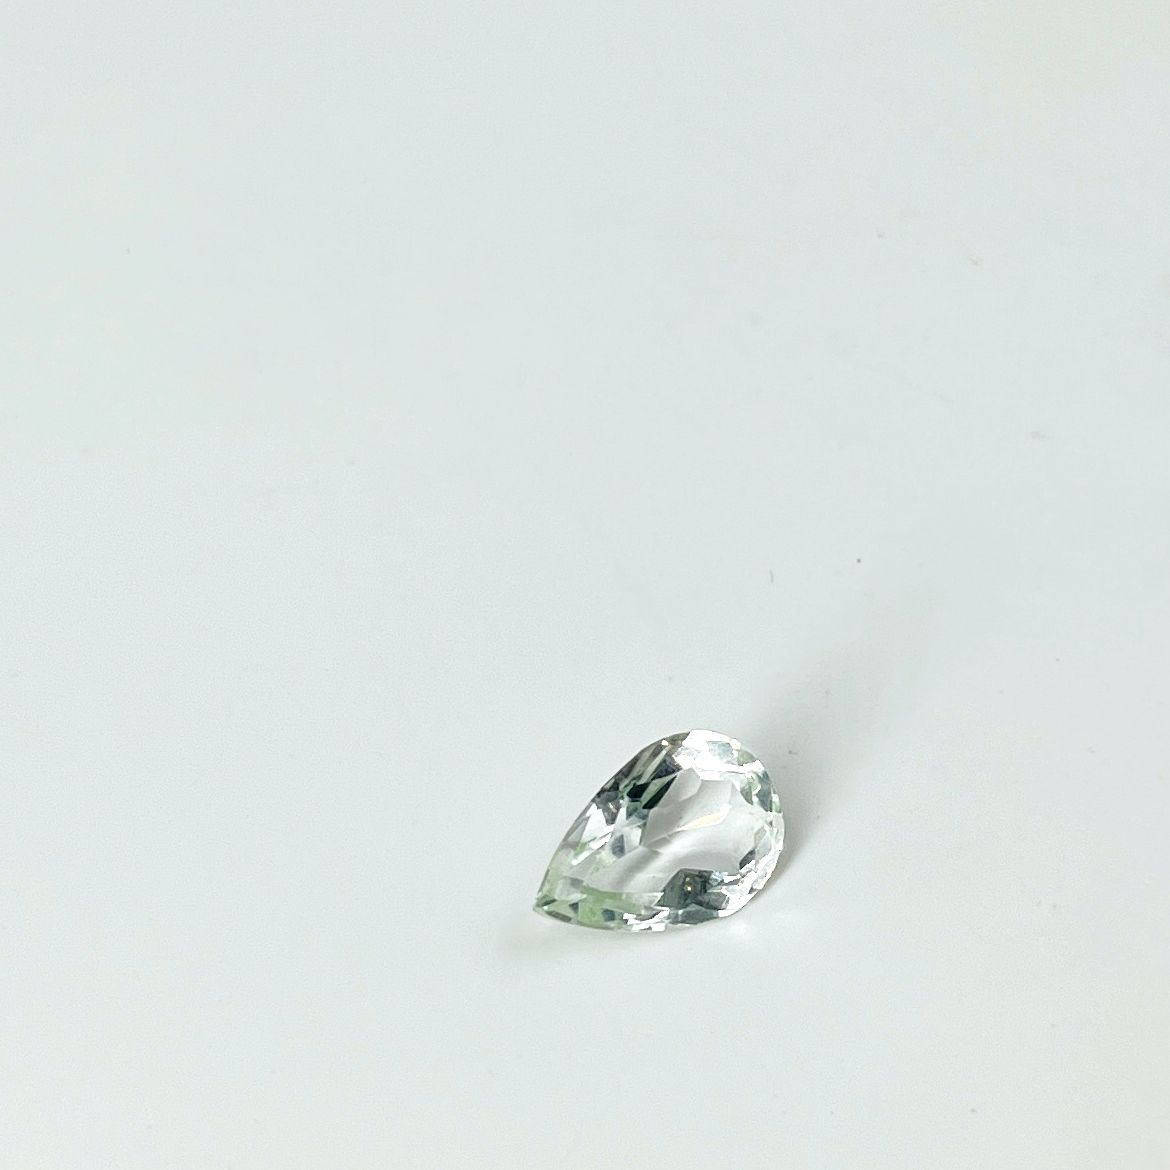 Null Colorless pear-shaped topaz weighing 5.27 cts Dimensions: 1.4 x 0.9 cm